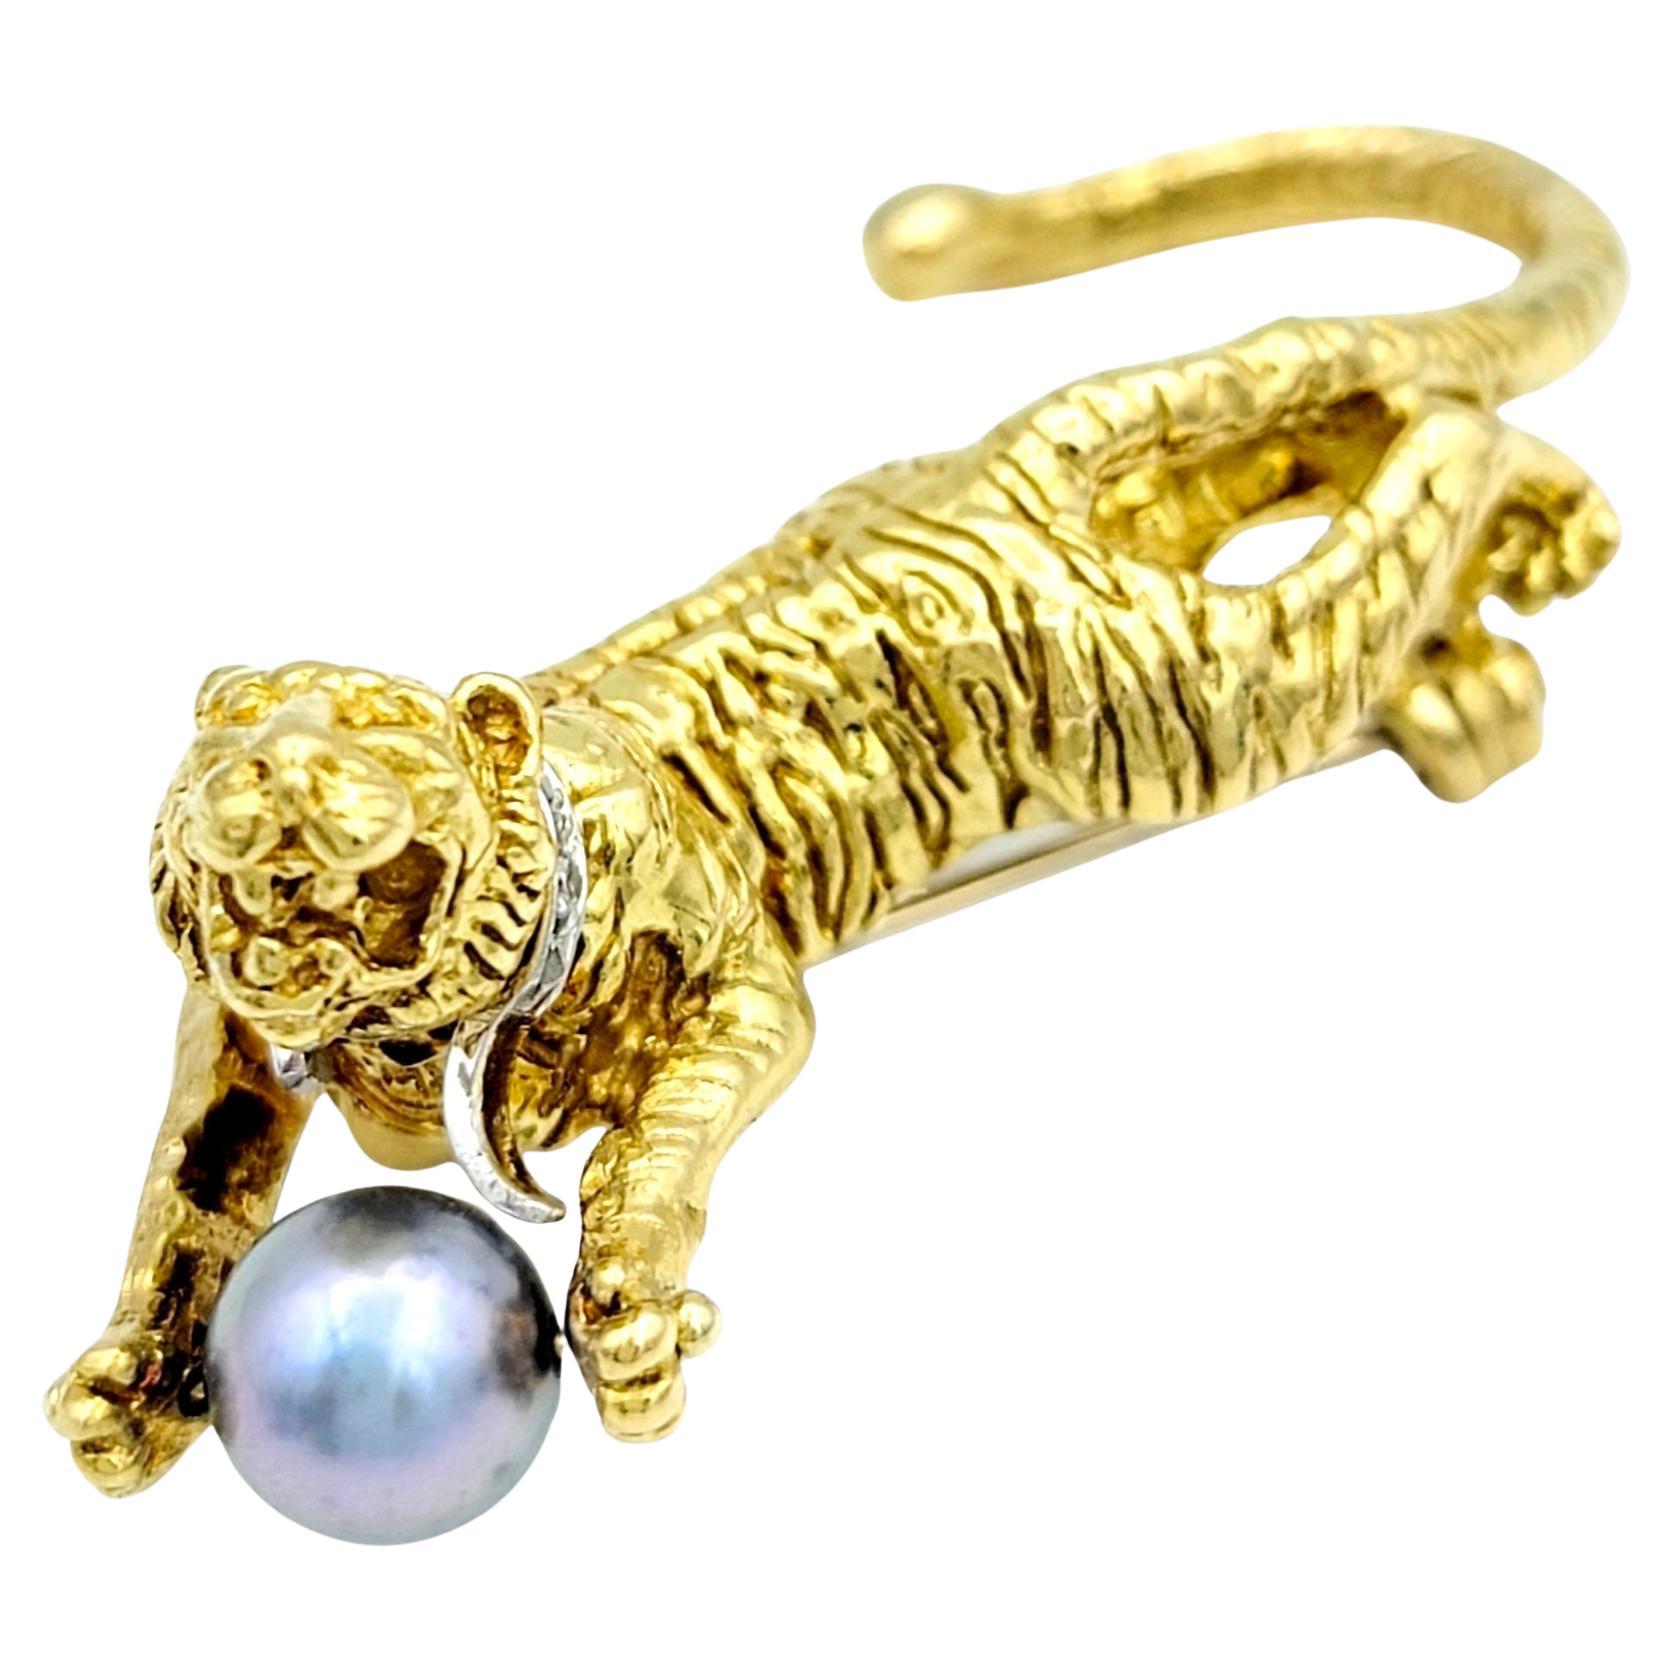 Tiger Brooch with Diamond Collar and Cultured Pearl "Ball" in 18 Karat Gold